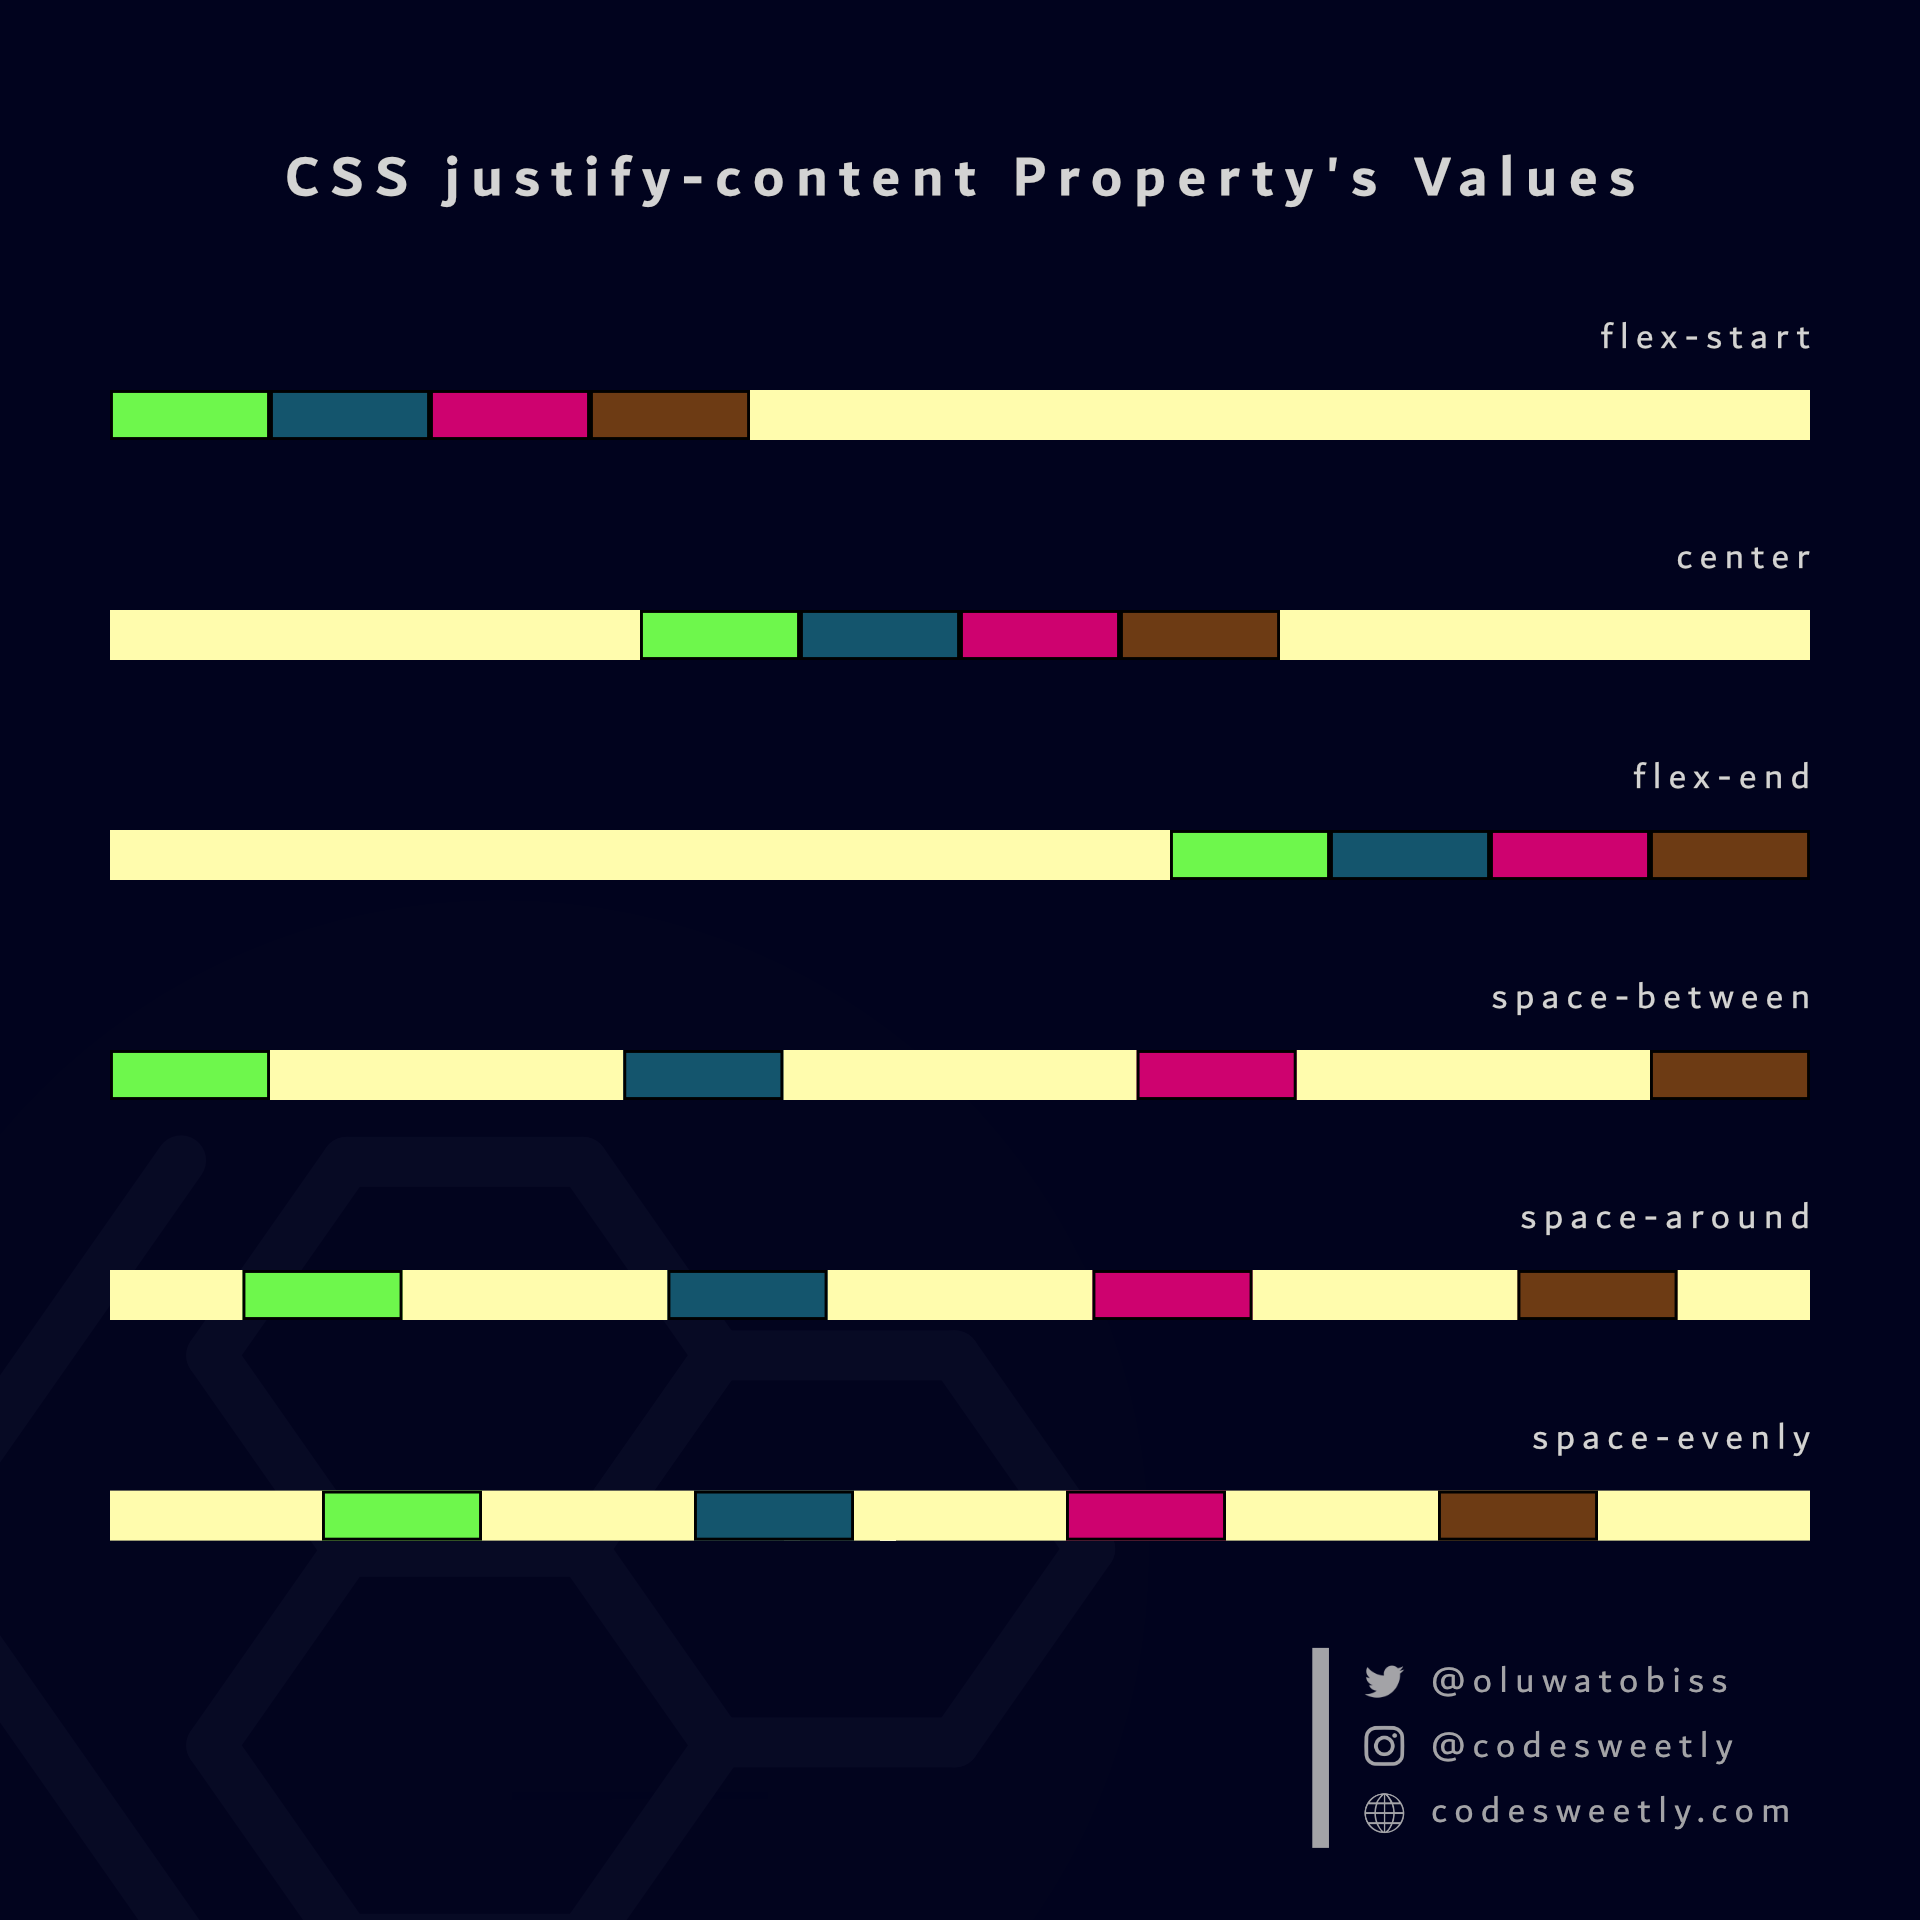 The CSS flexbox justify-content property's values